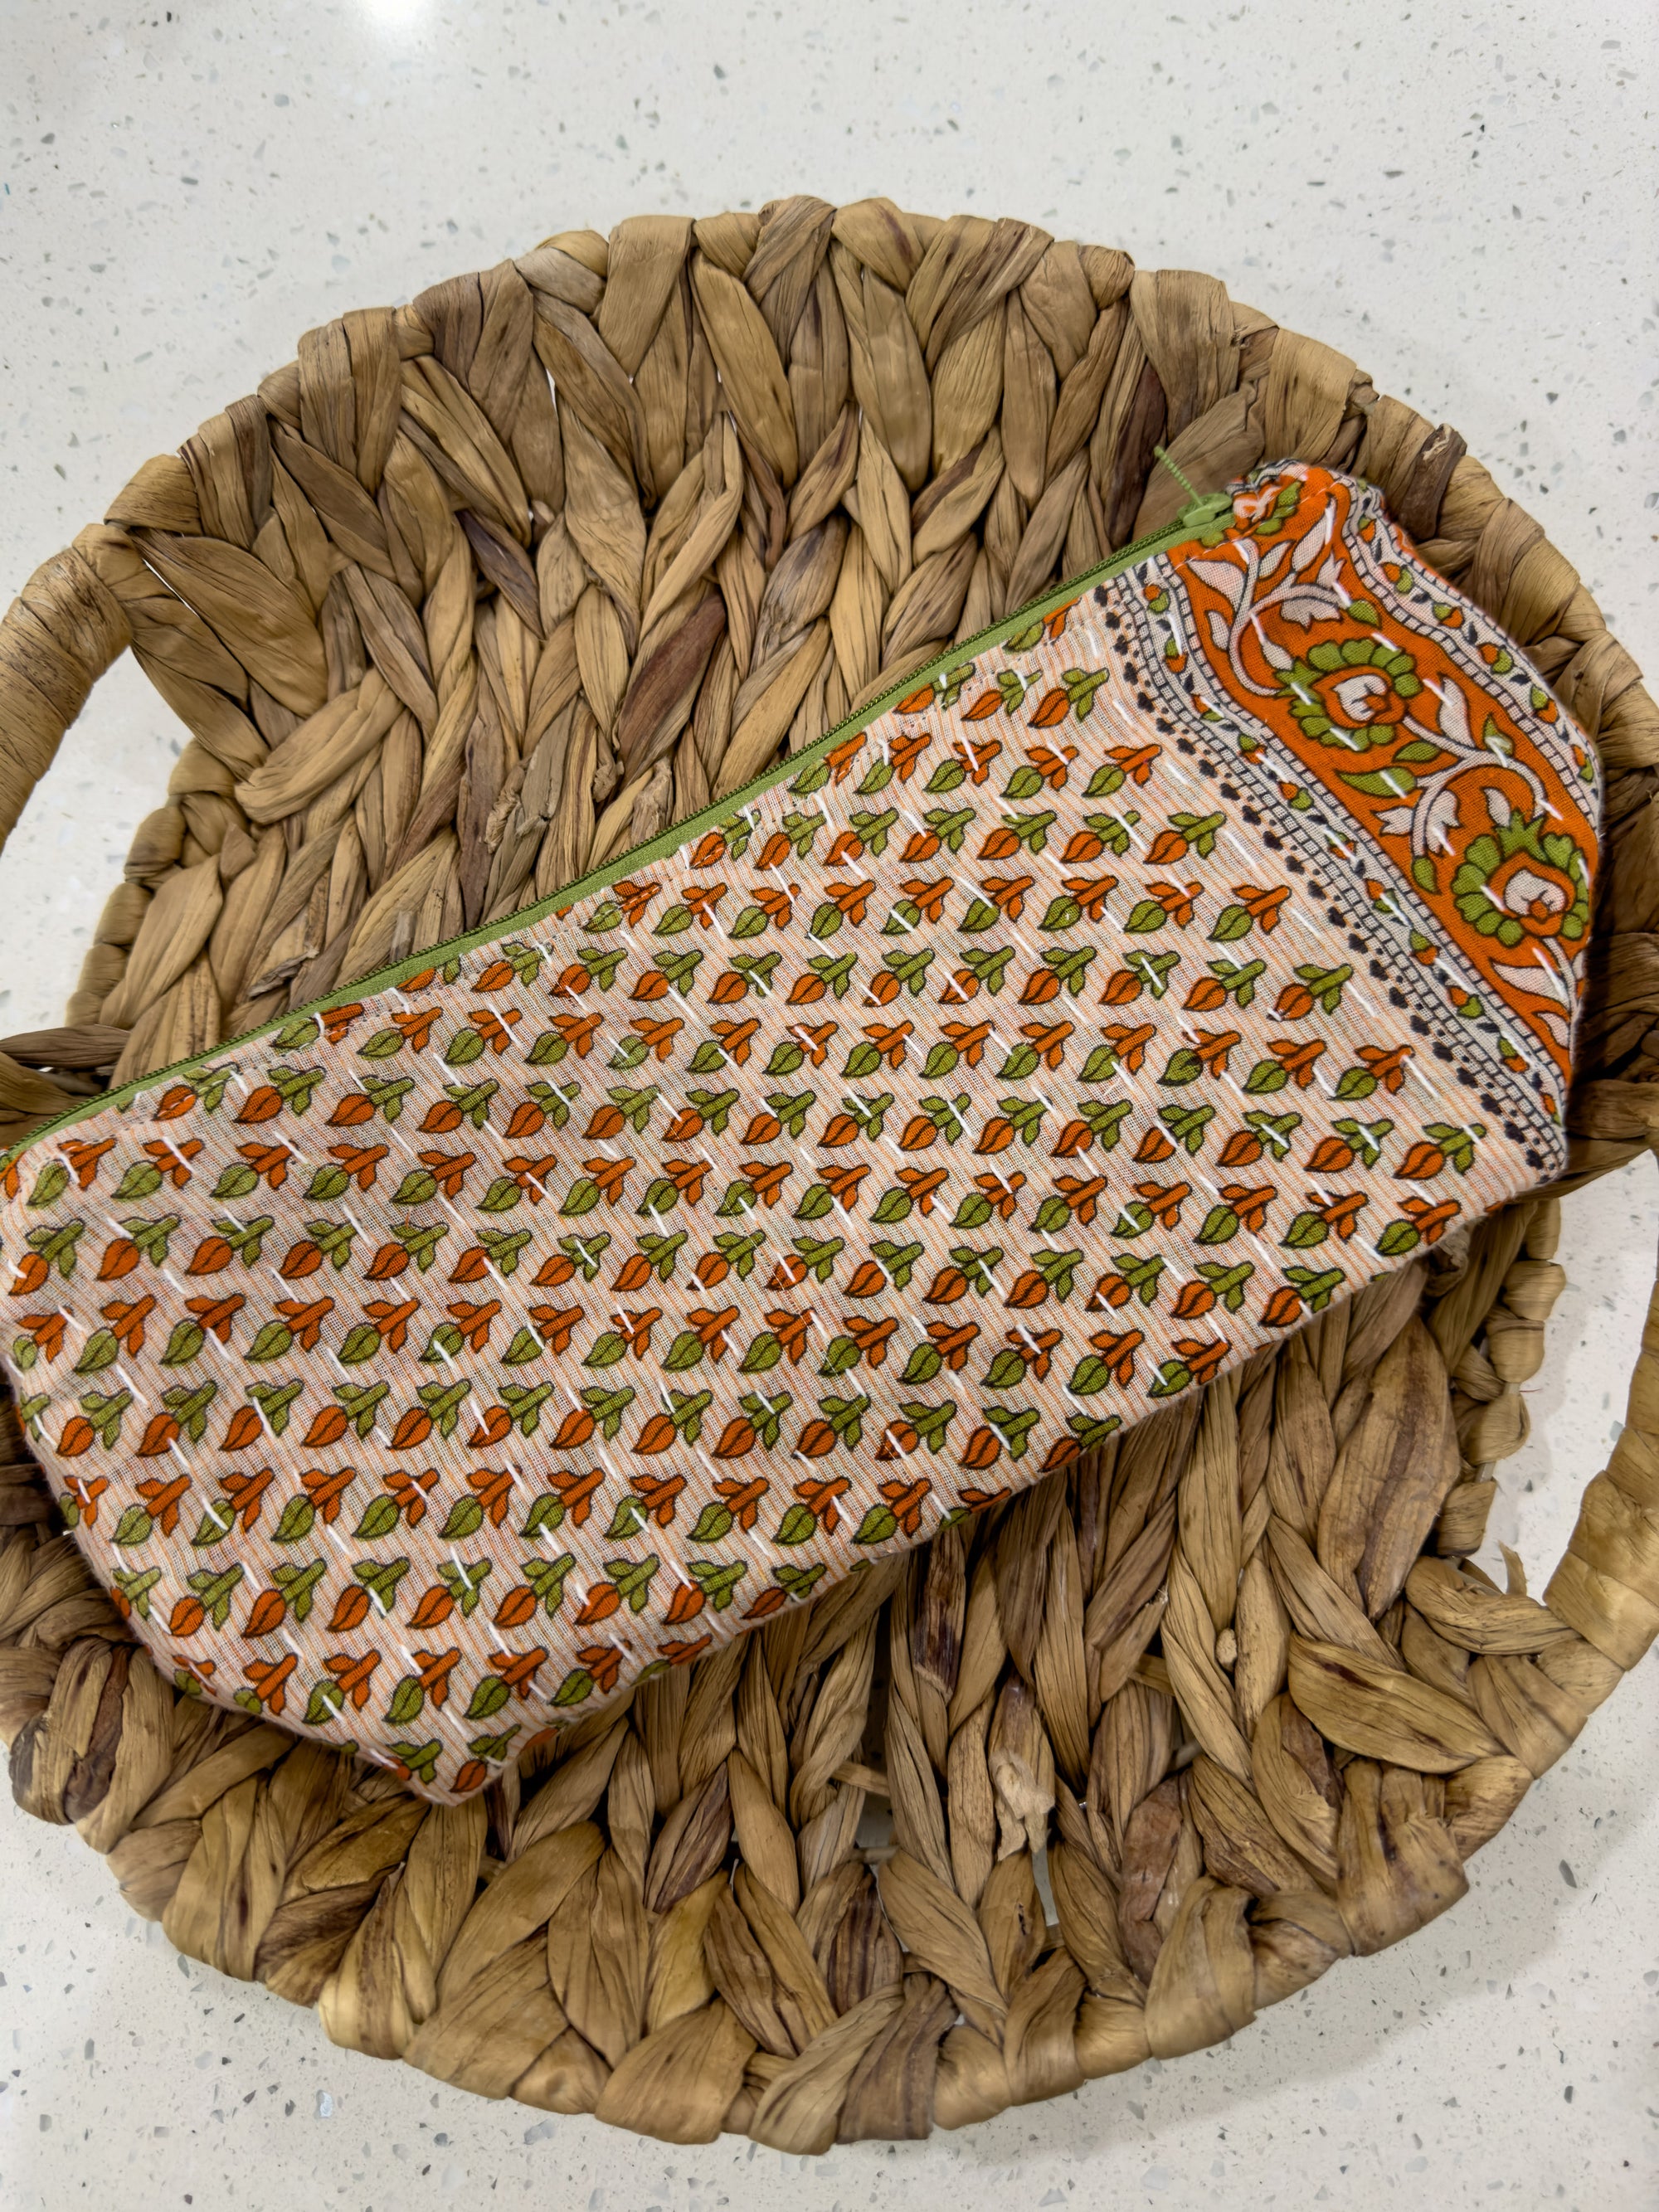 an orange and green tie sitting on top of a woven basket